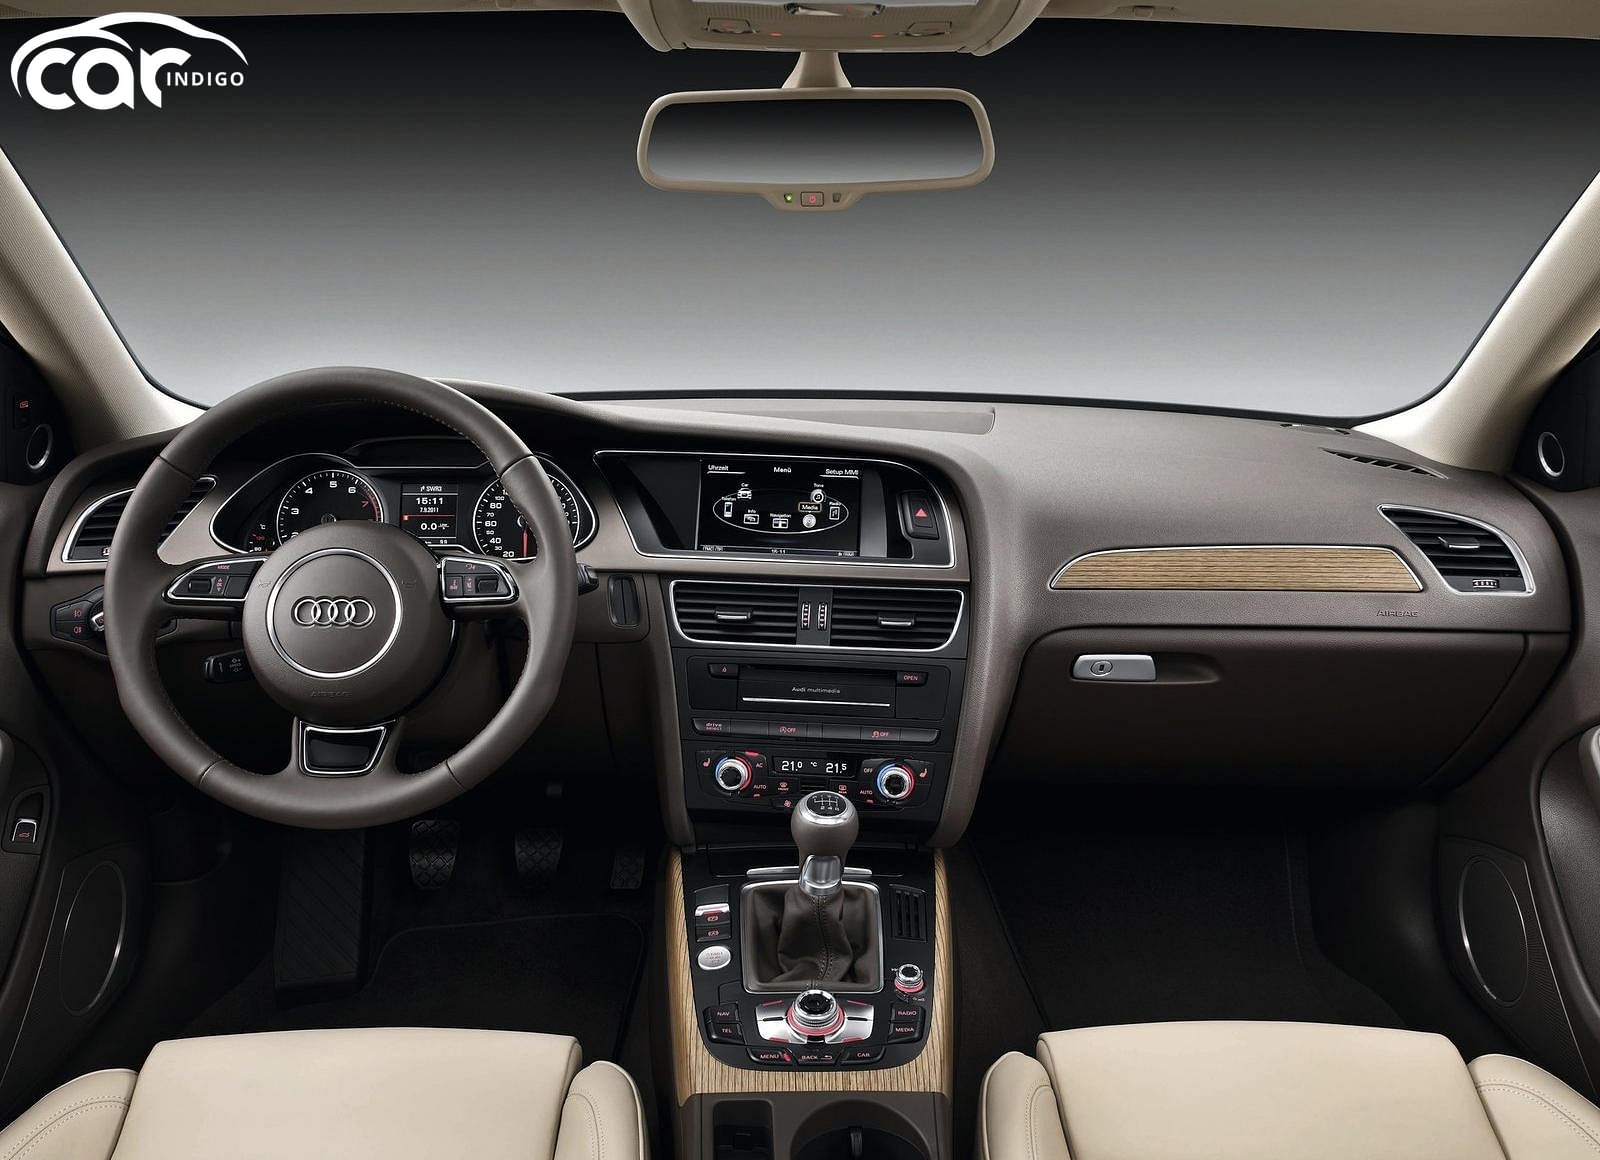 2013 Audi A4 Interior Review - Seating, Infotainment, Dashboard and  Features | CarIndigo.com